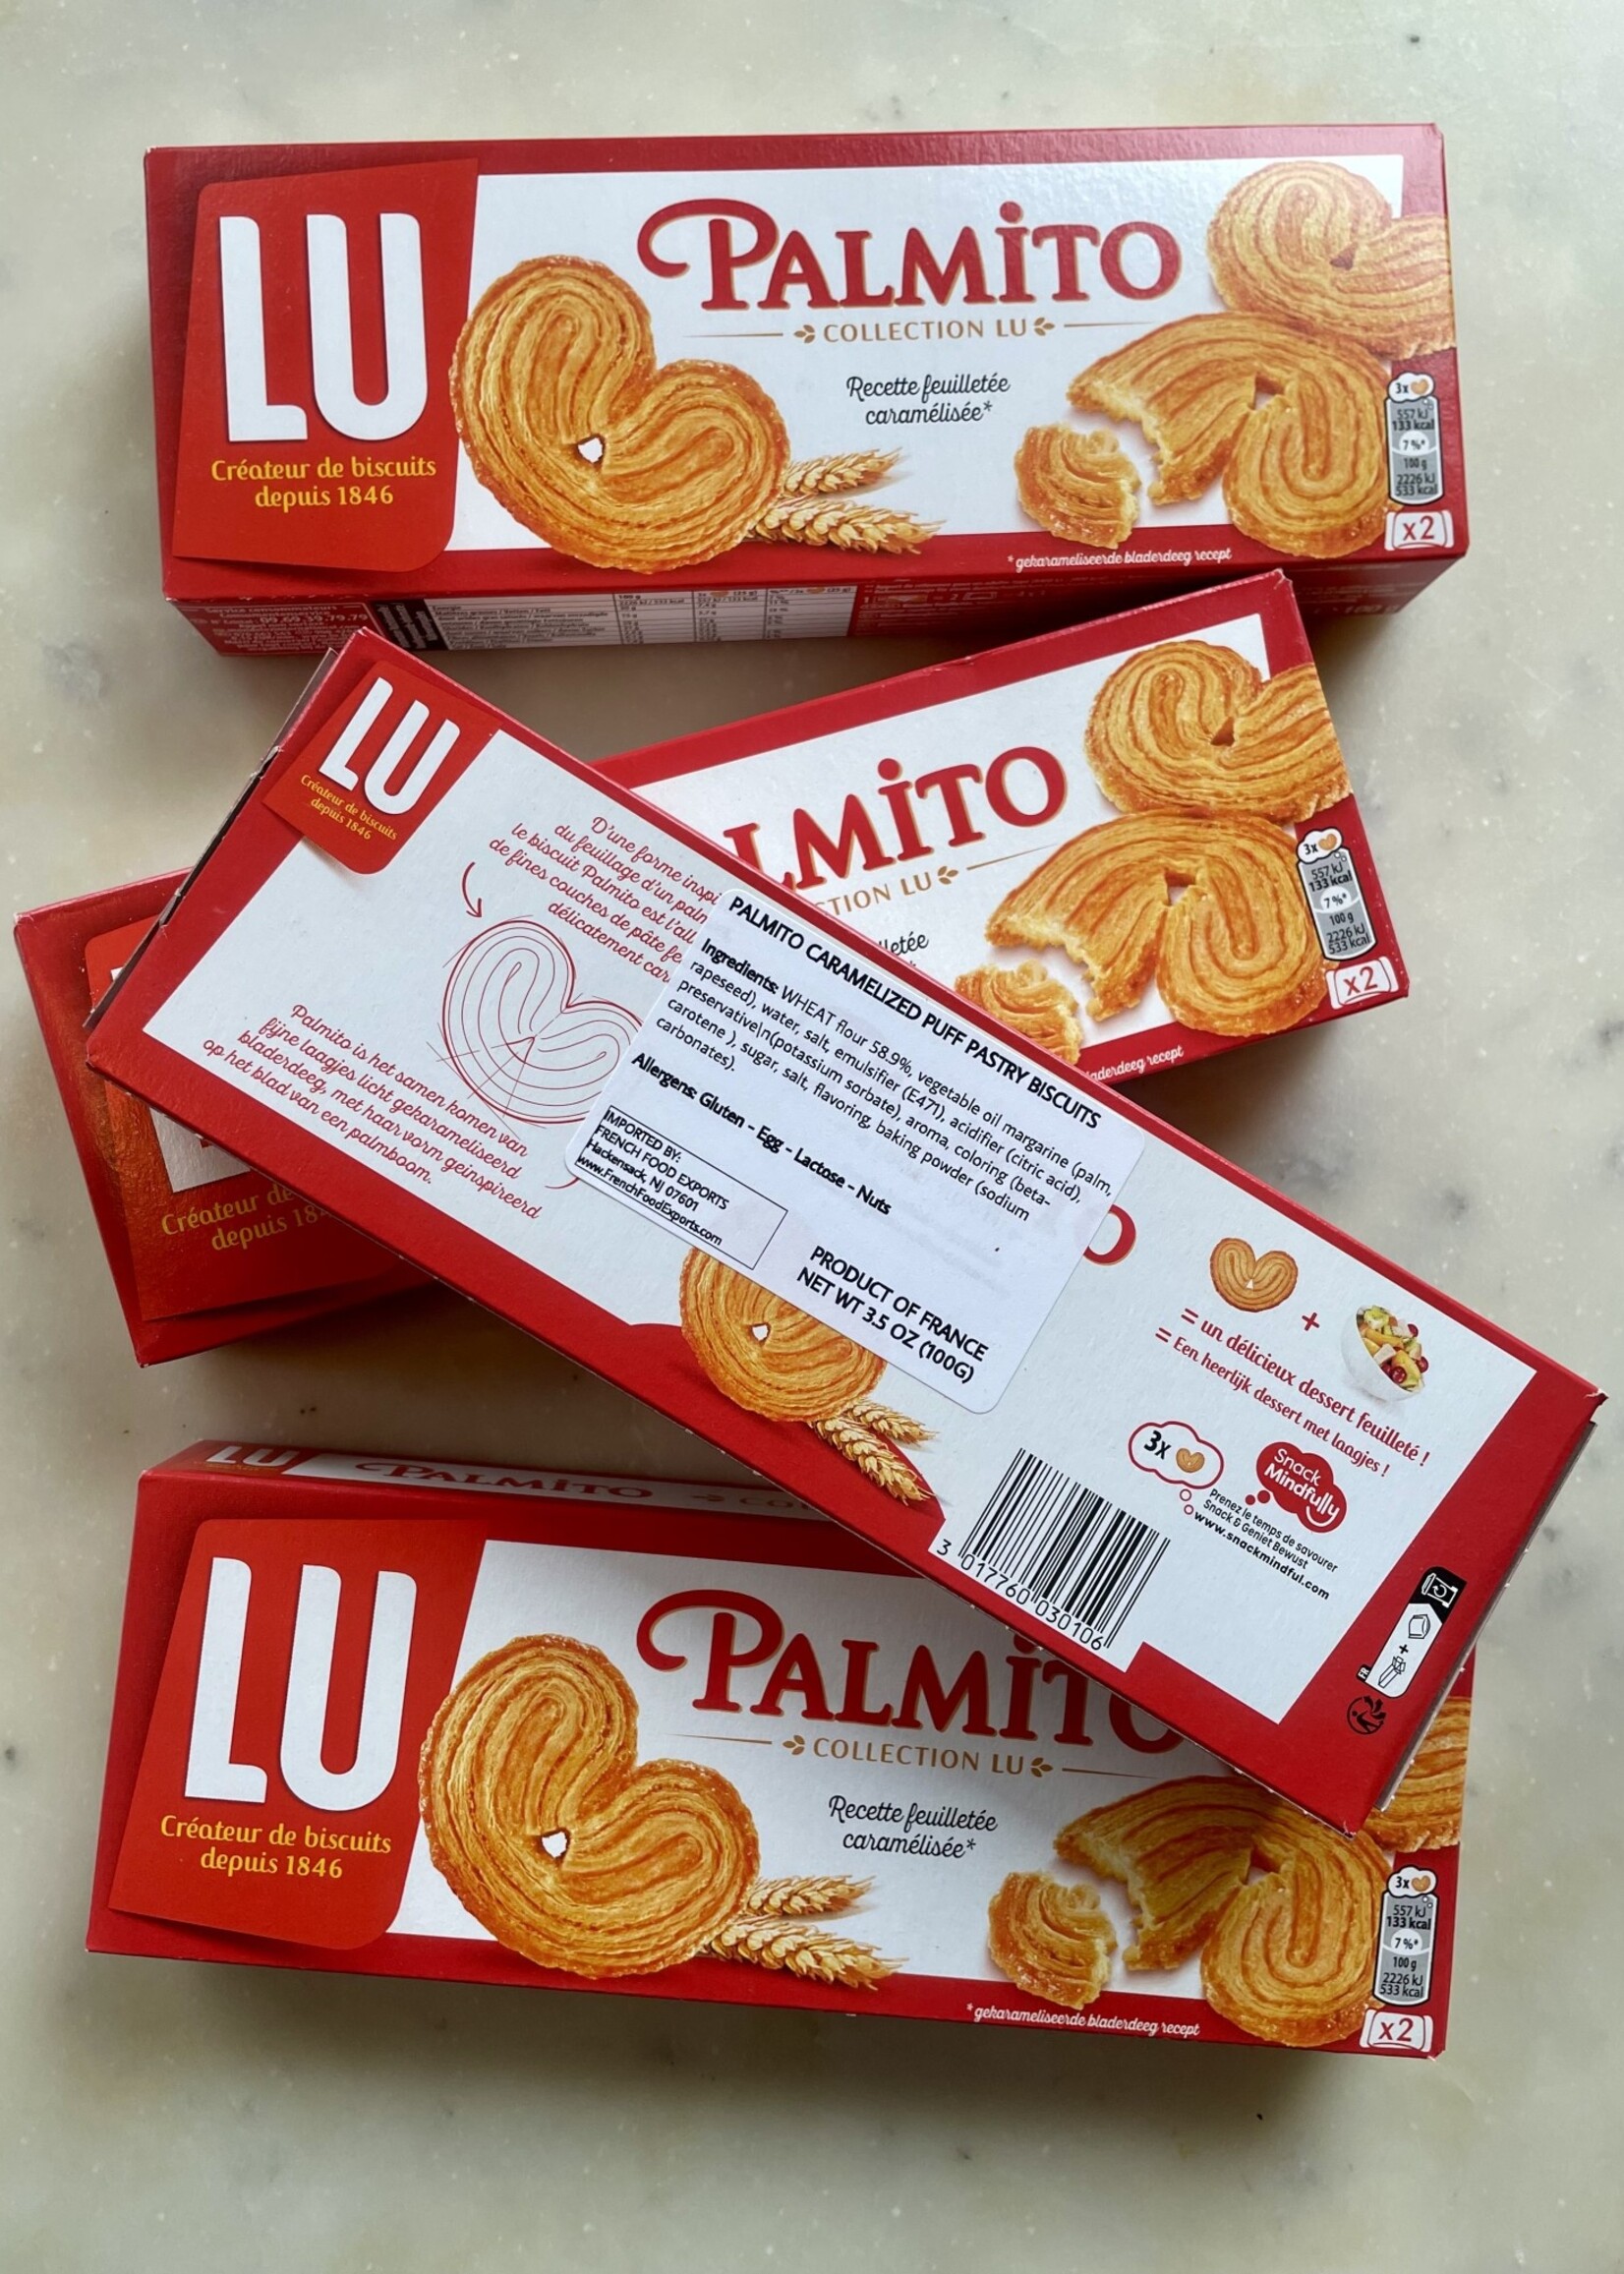 LU French Palmito Palmiers Cookies 3.5oz (100g)